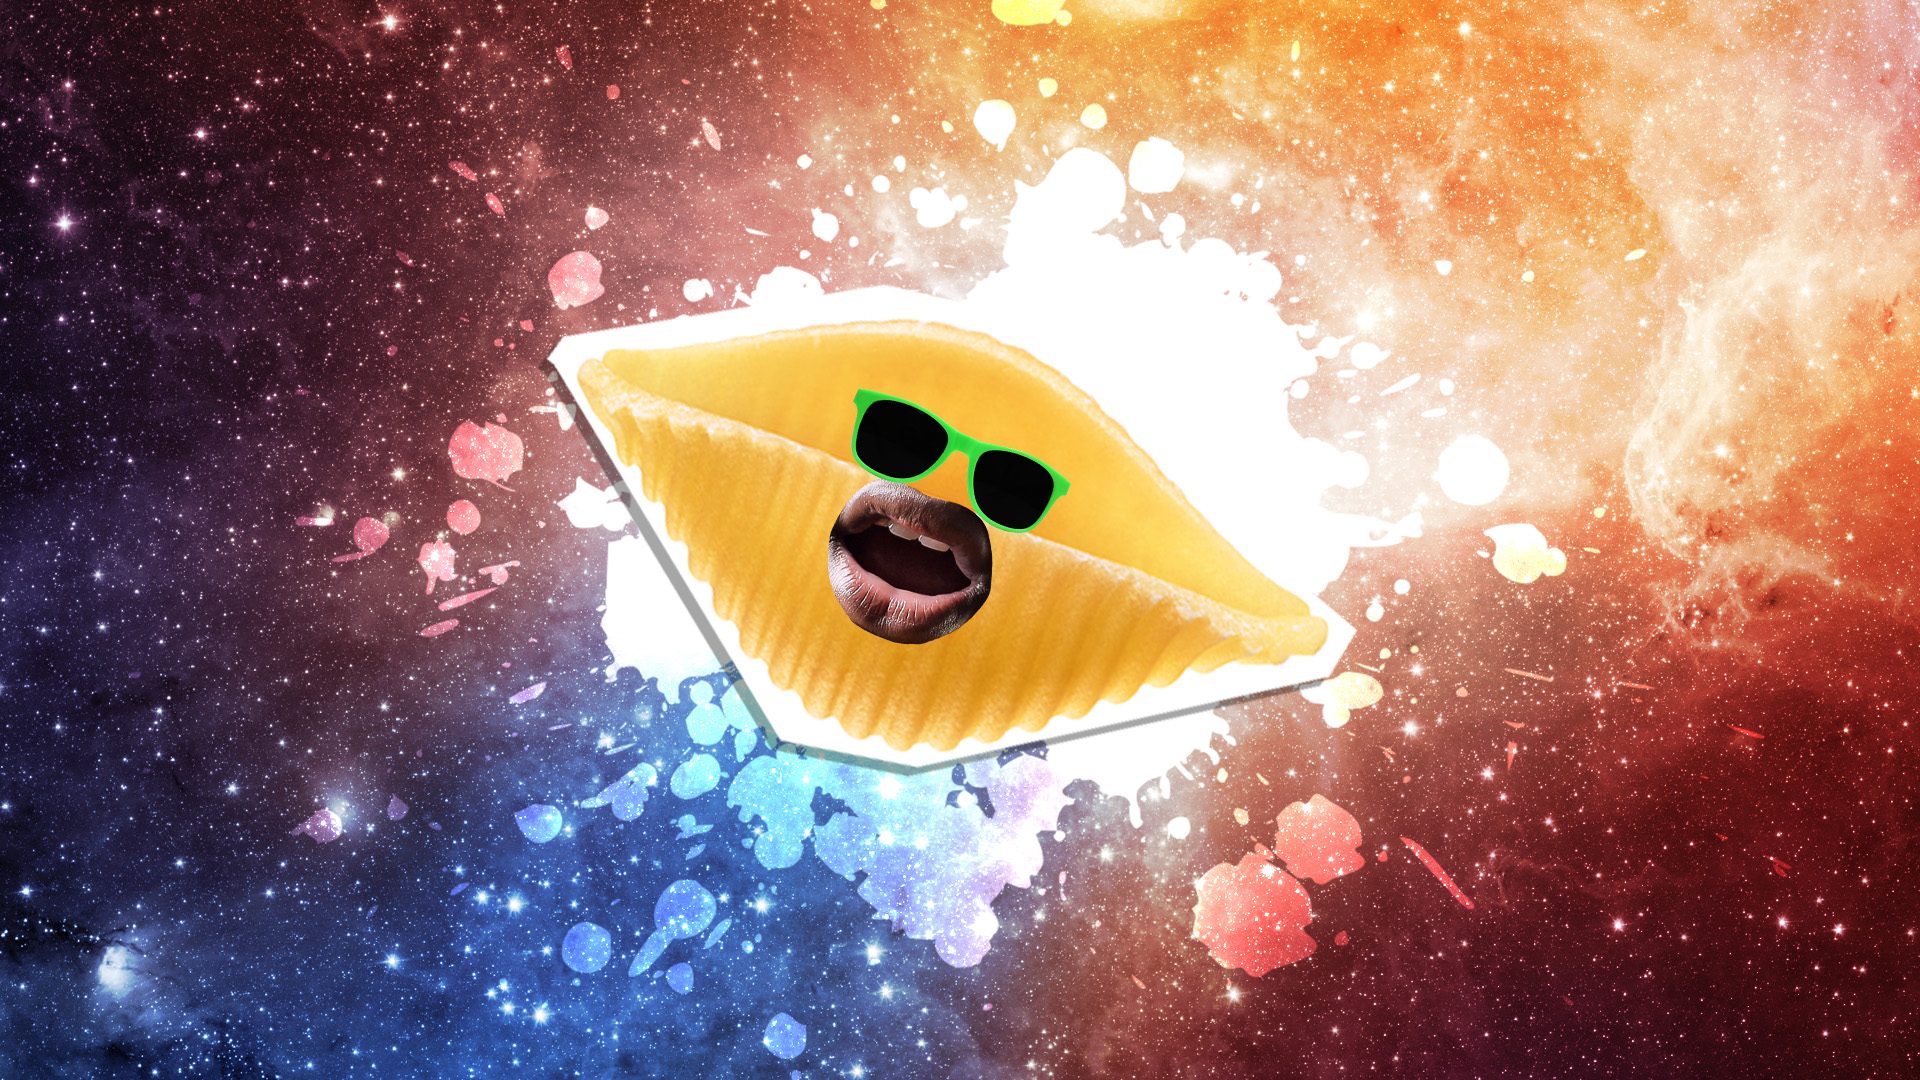 Some laughing pasta in space